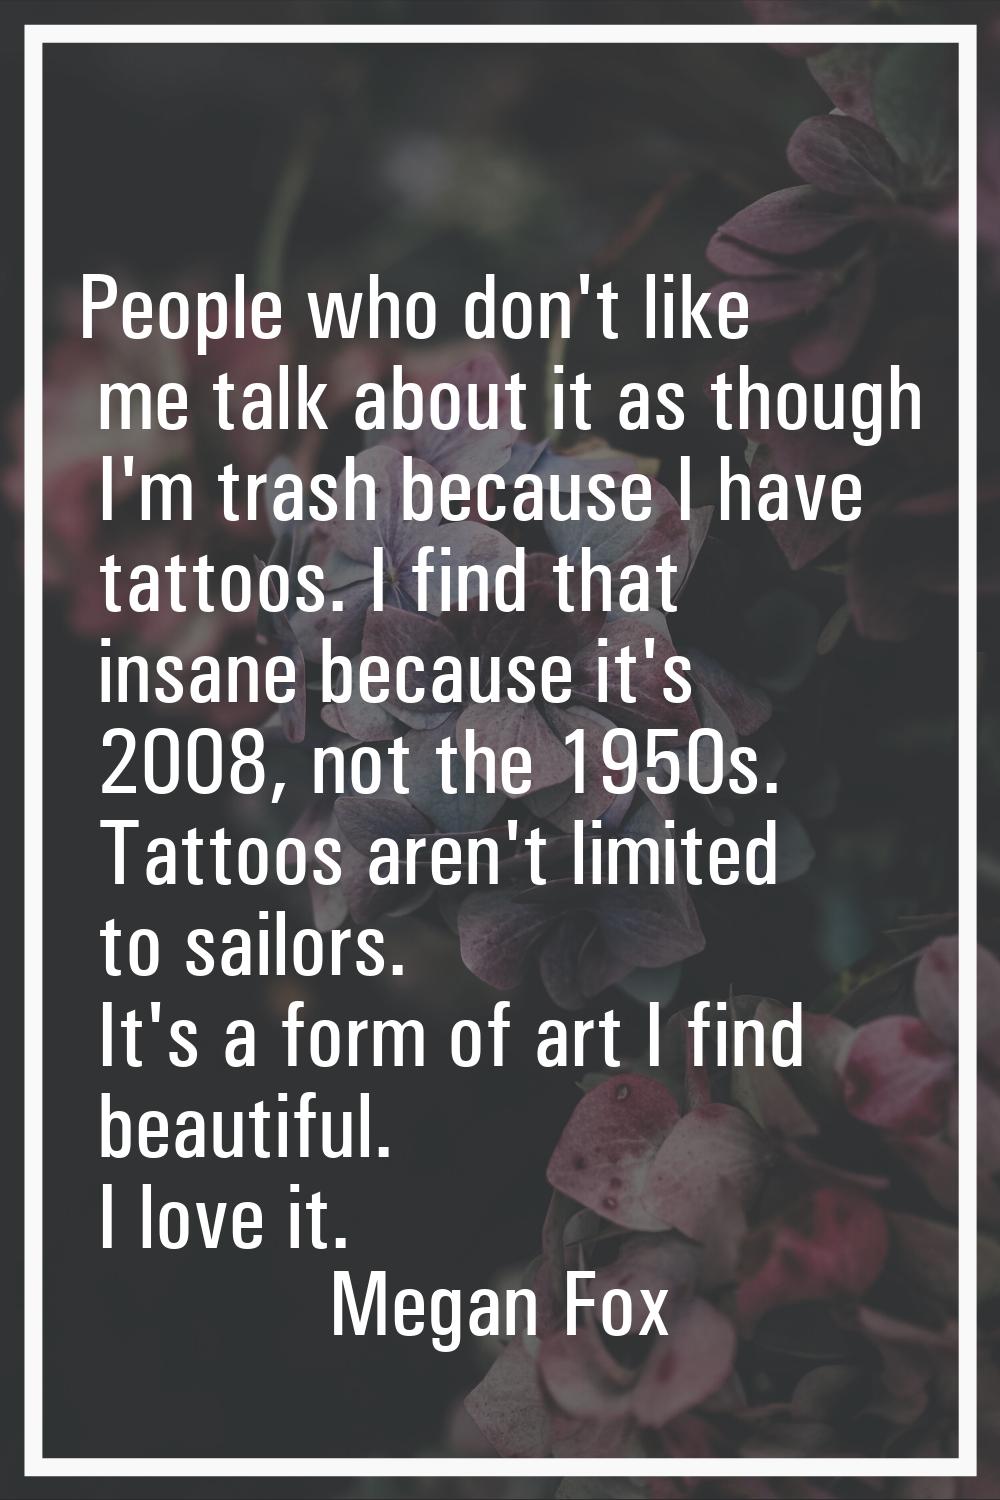 People who don't like me talk about it as though I'm trash because I have tattoos. I find that insa